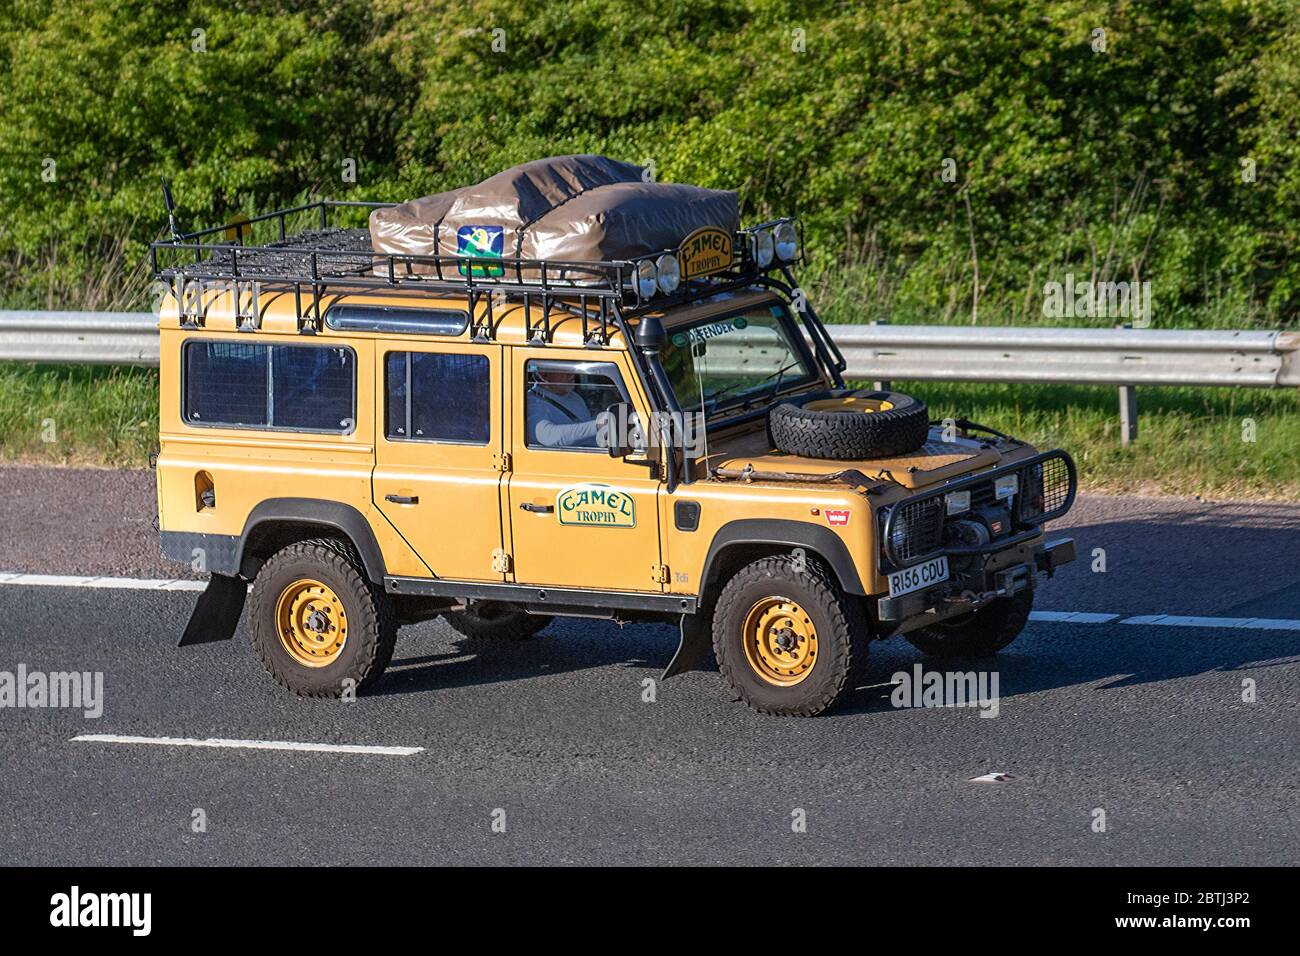 1998 90s nineties Camel Trophy Land Rover 110 Defender SW TDI; Vintage  expedition leisure, British off-road 4x4, rugged off-road all-terrain overland rally adventure vehicle, LandRover Discovery Turbo Diesel UK Stock Photo